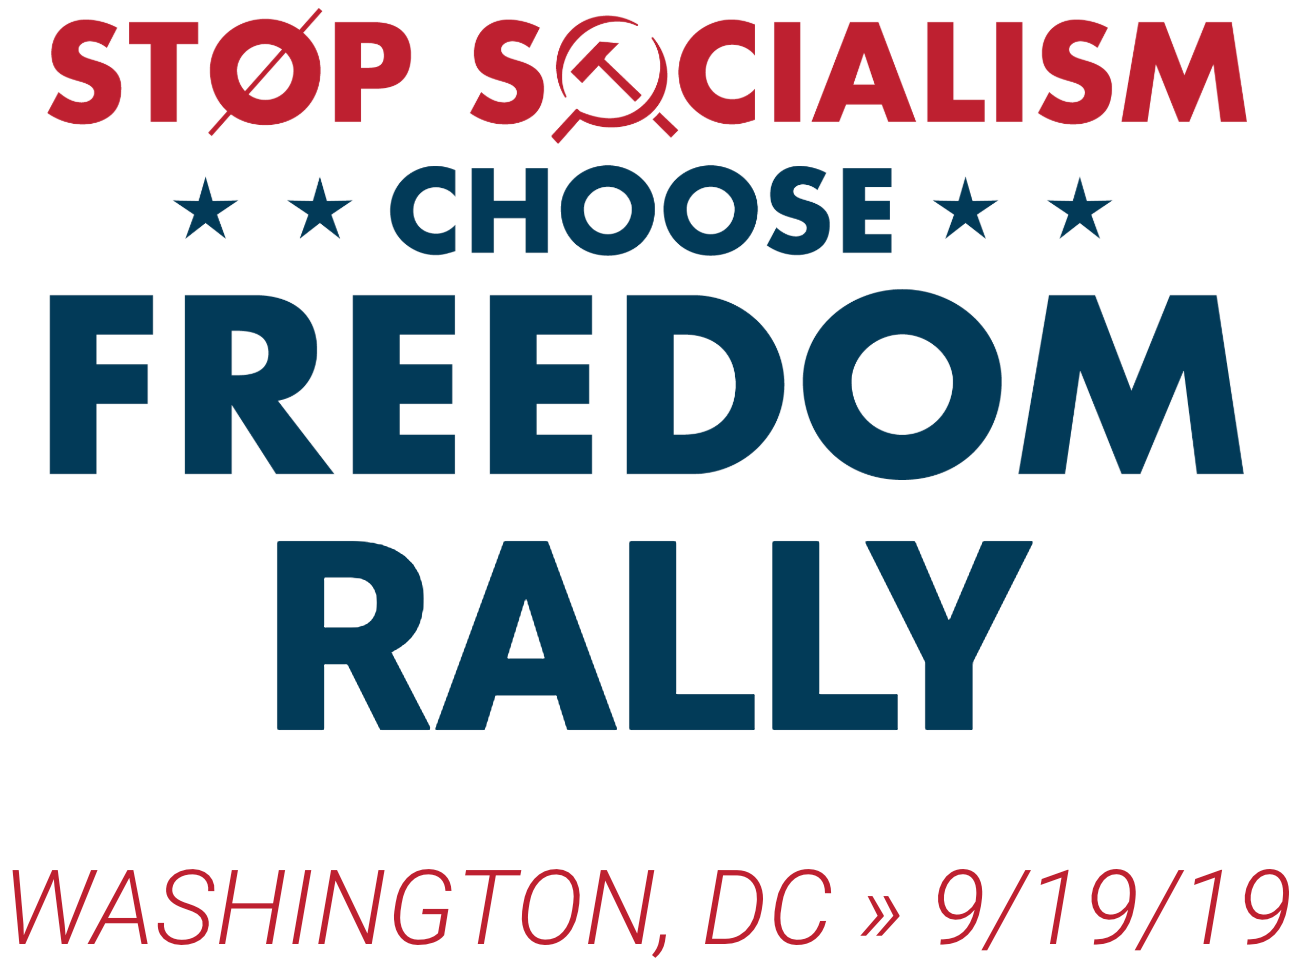 STOP SOCIALISM, CHOOSE FREEDOM rally